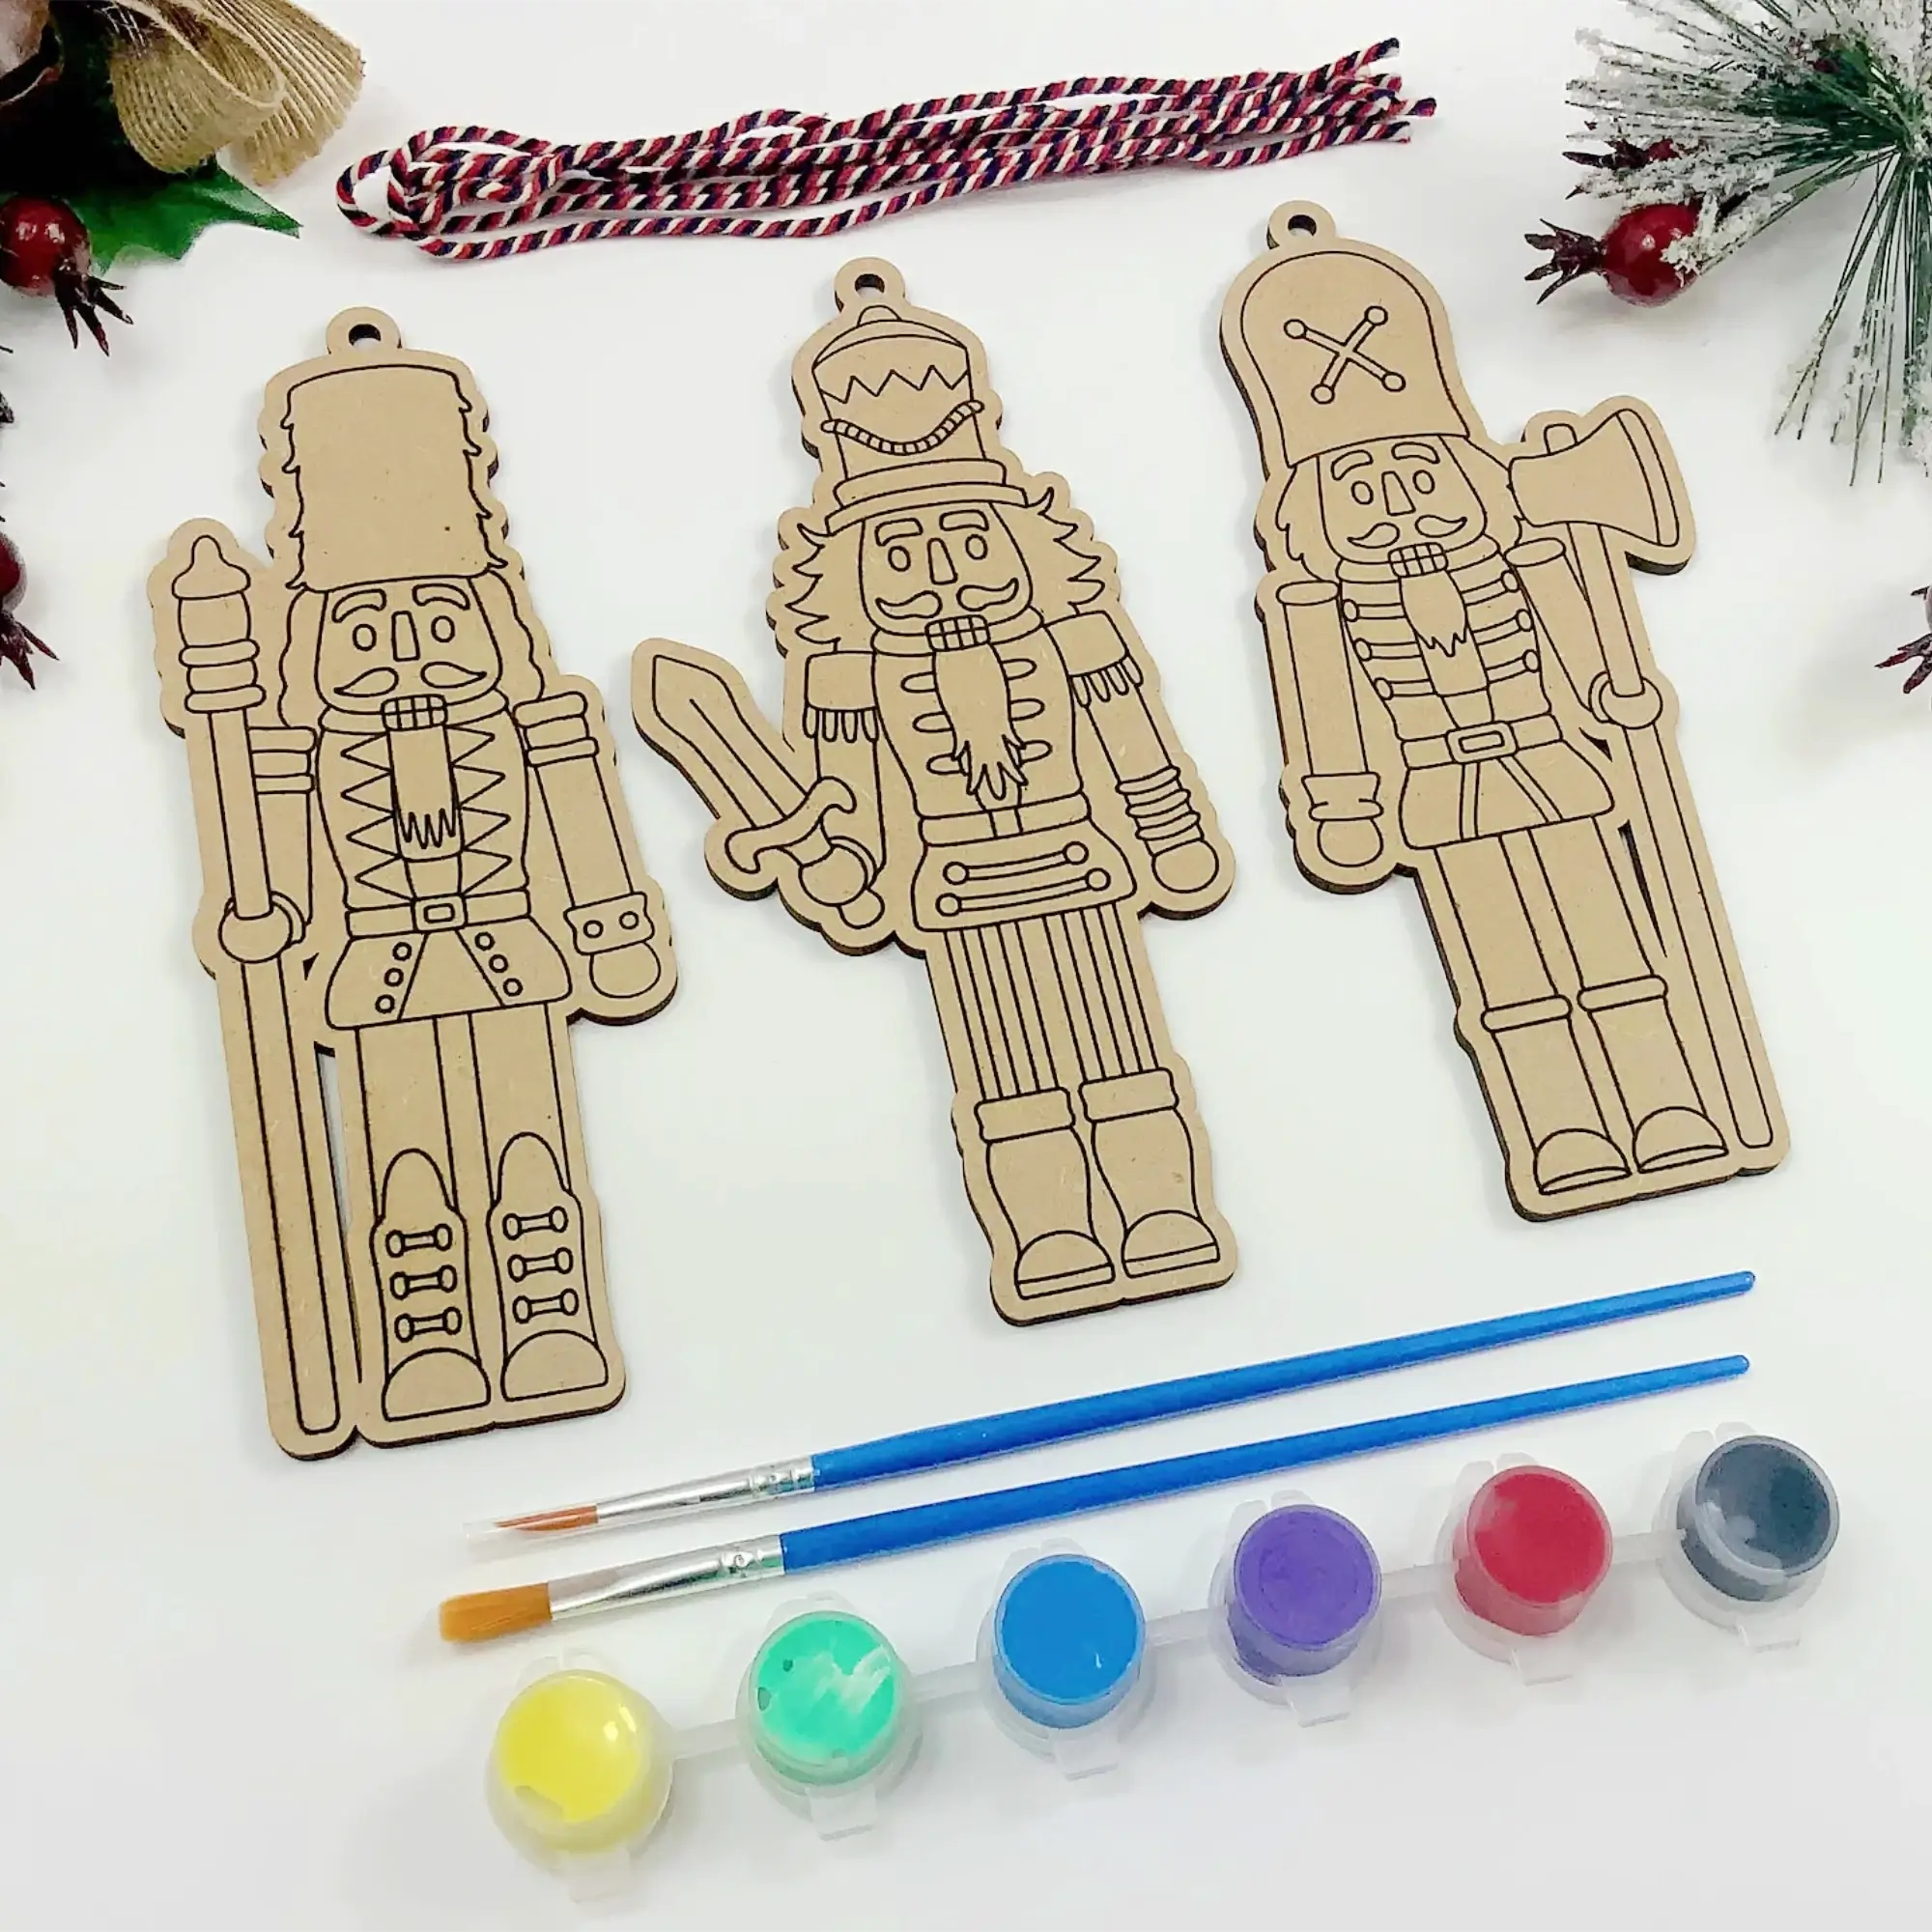 Nutcracker Soldier Christmas Painting Craft Kit